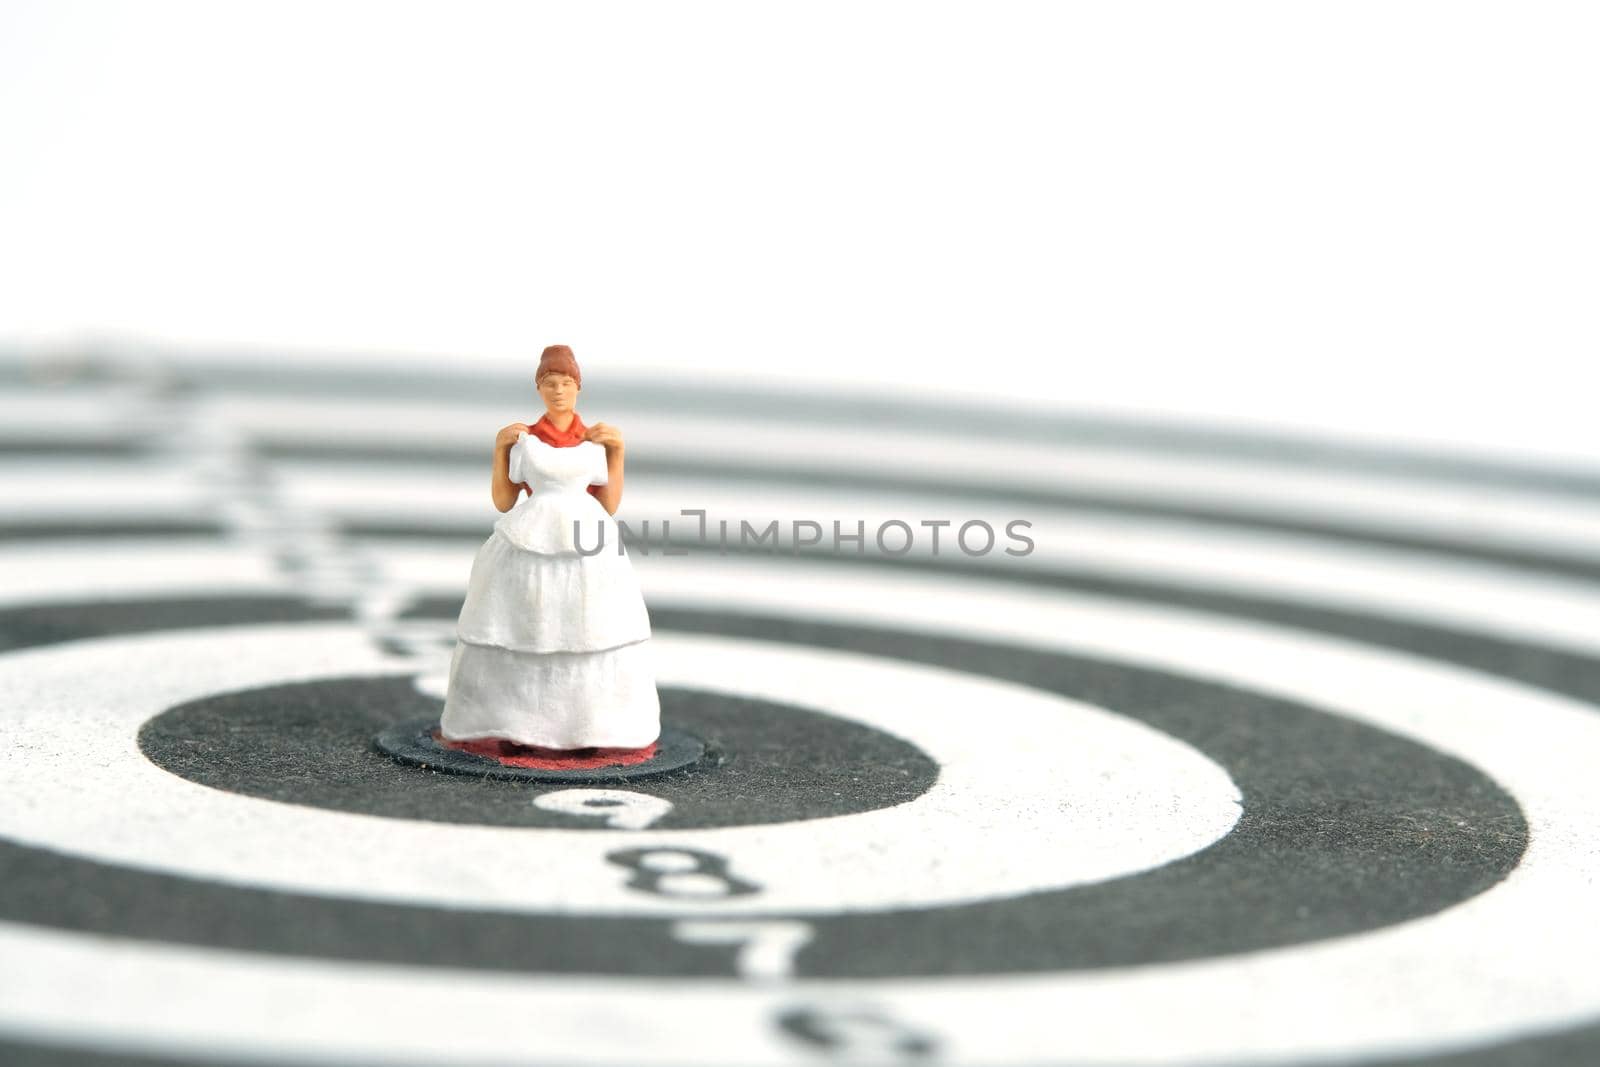 Wedding married target goal conceptual miniature people toy photography. Women trying wedding dress standing on dartboard. Image photo